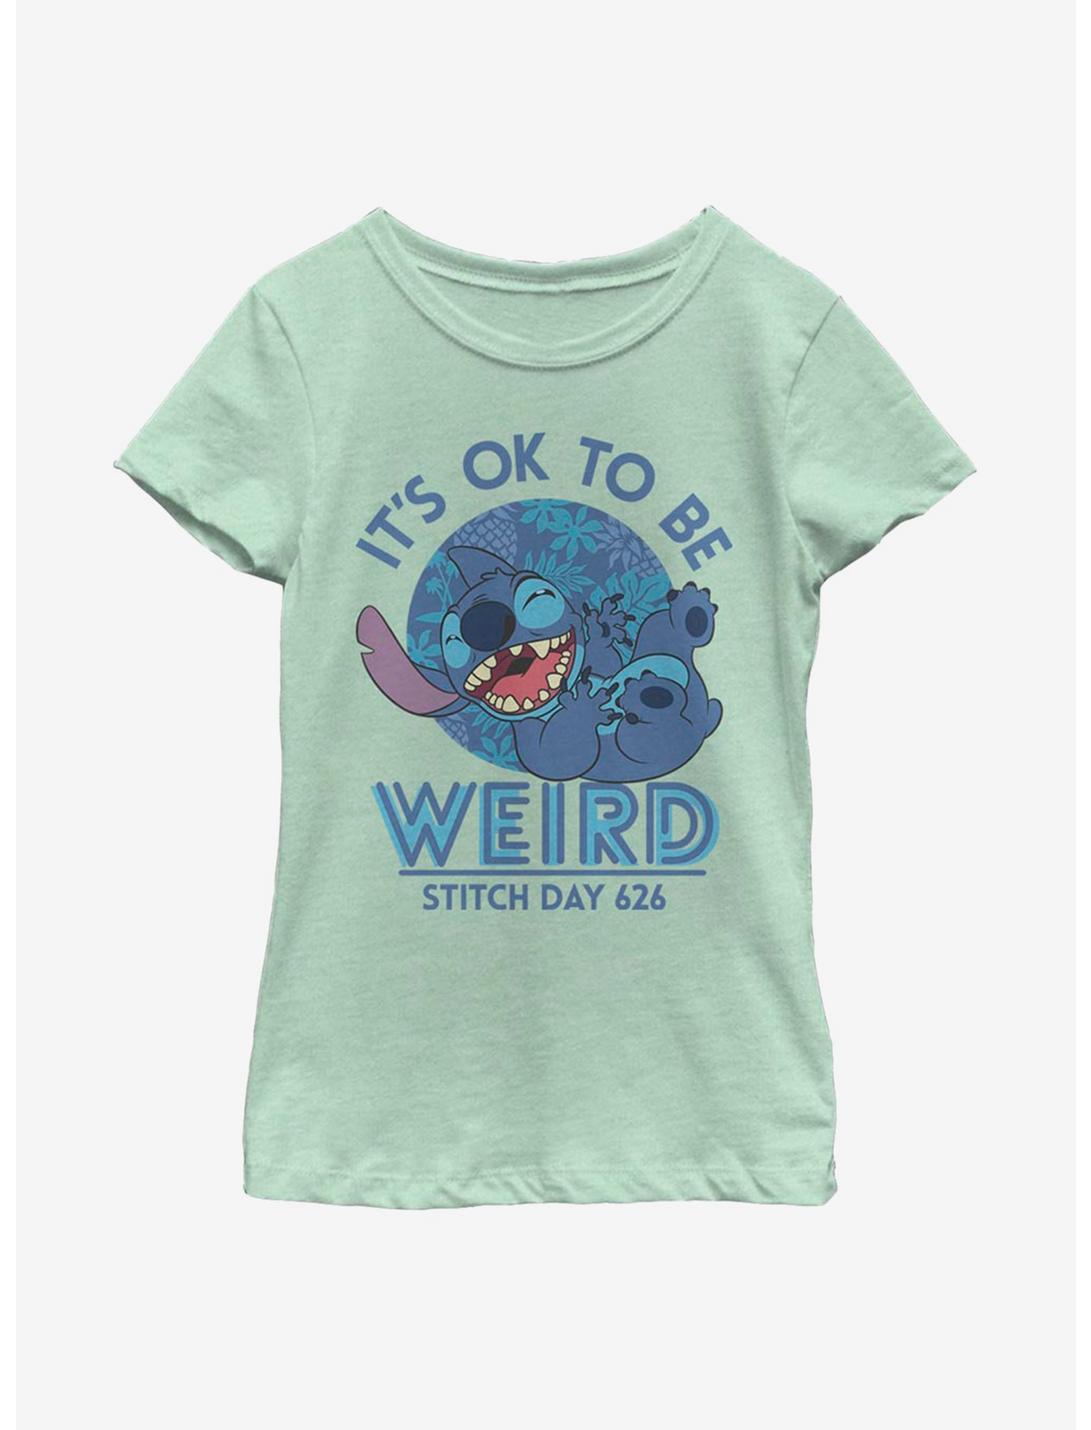 Disney Lilo And Stitch Ok To Be Weird Youth Girls T-Shirt, MINT, hi-res